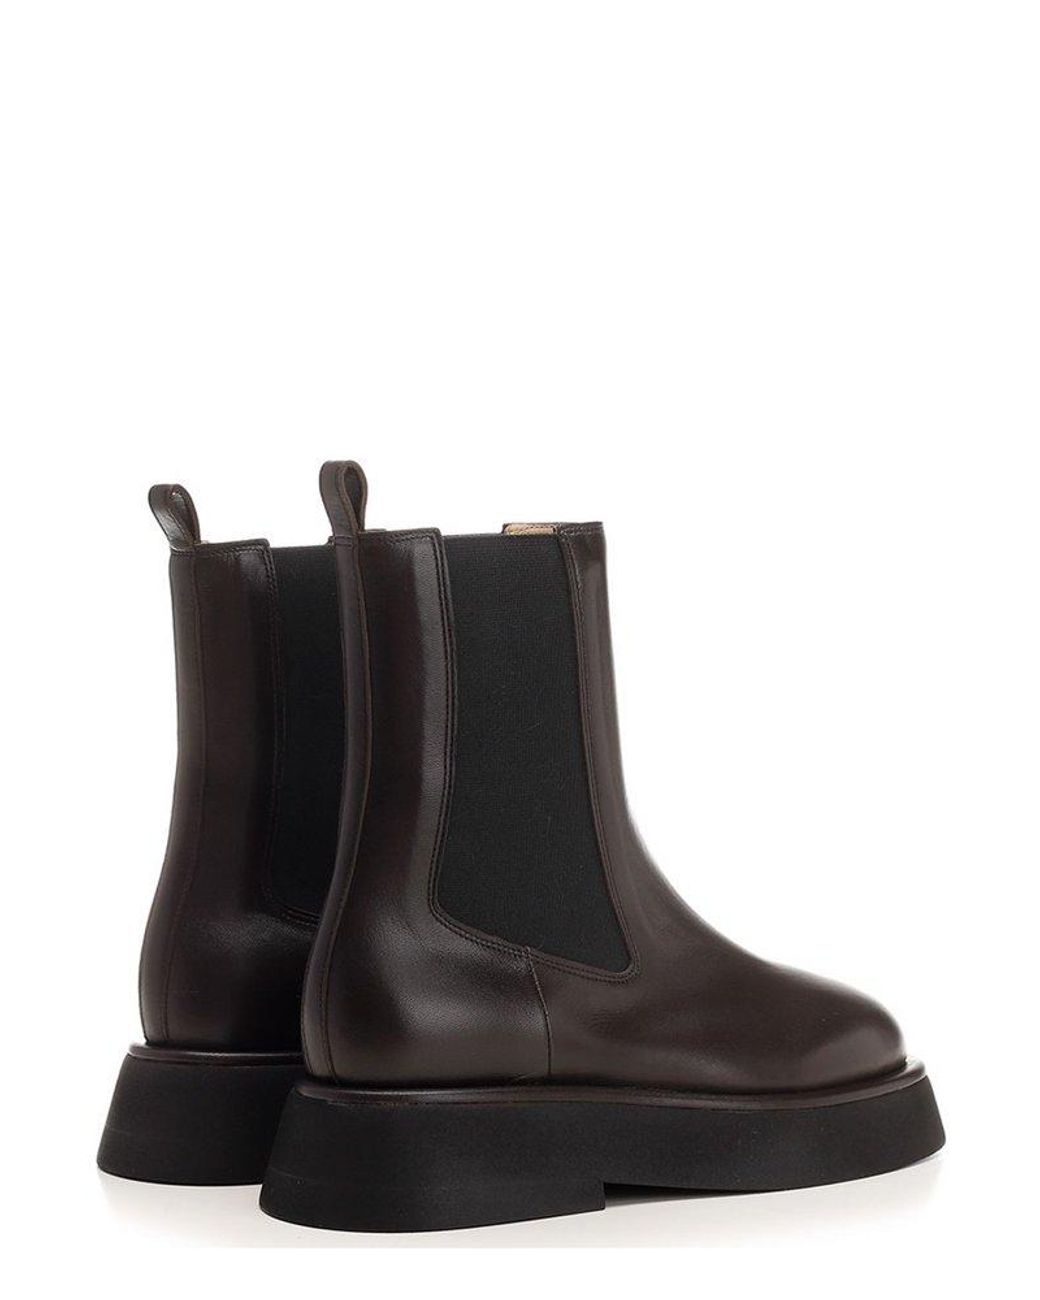 Wandler Leather Rosa Long Boots in Brown (Black) | Lyst